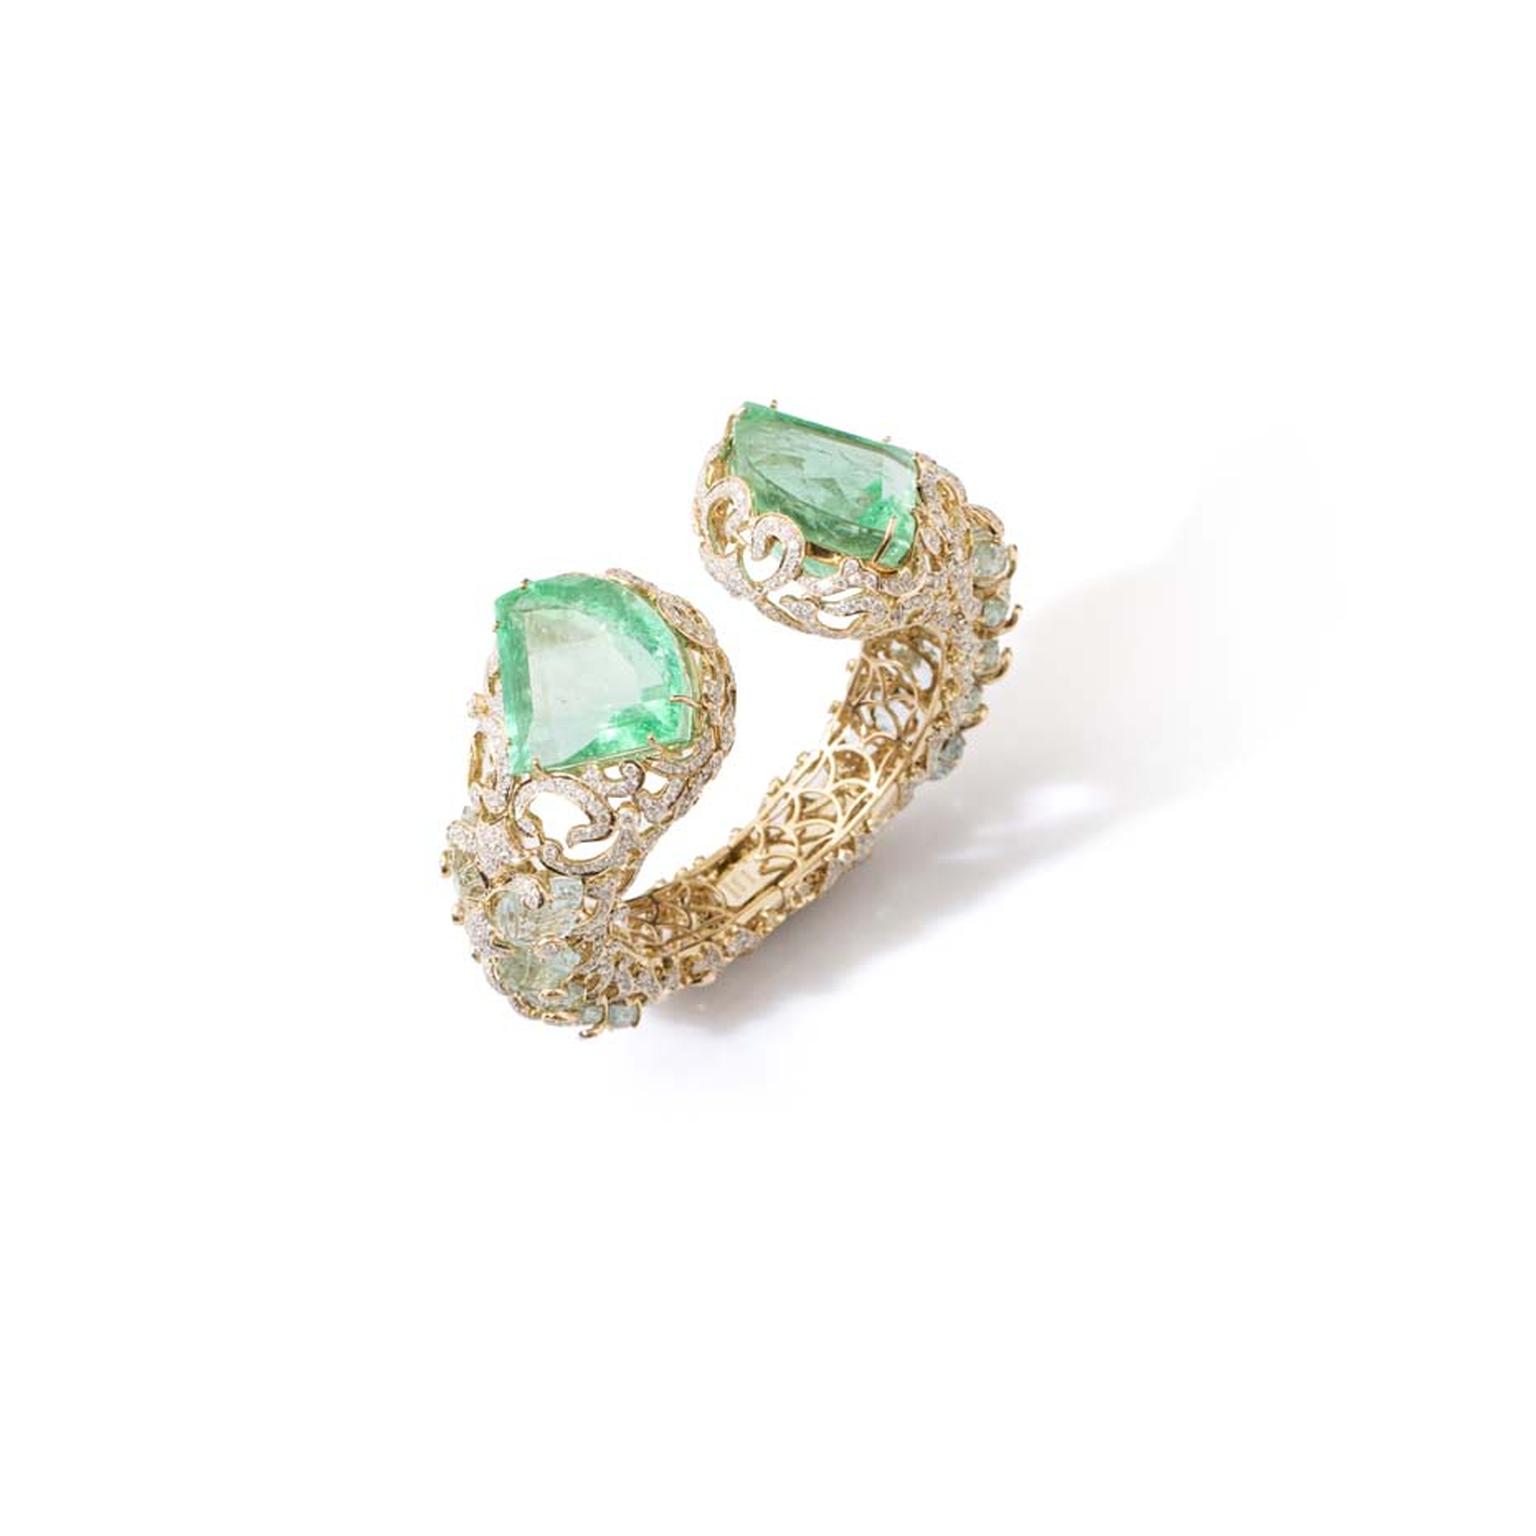 Le Jardin Exotique Colombian emerald cuff set with two kite-shaped emeralds weighing 151.24ct, carved aquamarine leaves and diamonds in yellow gold.